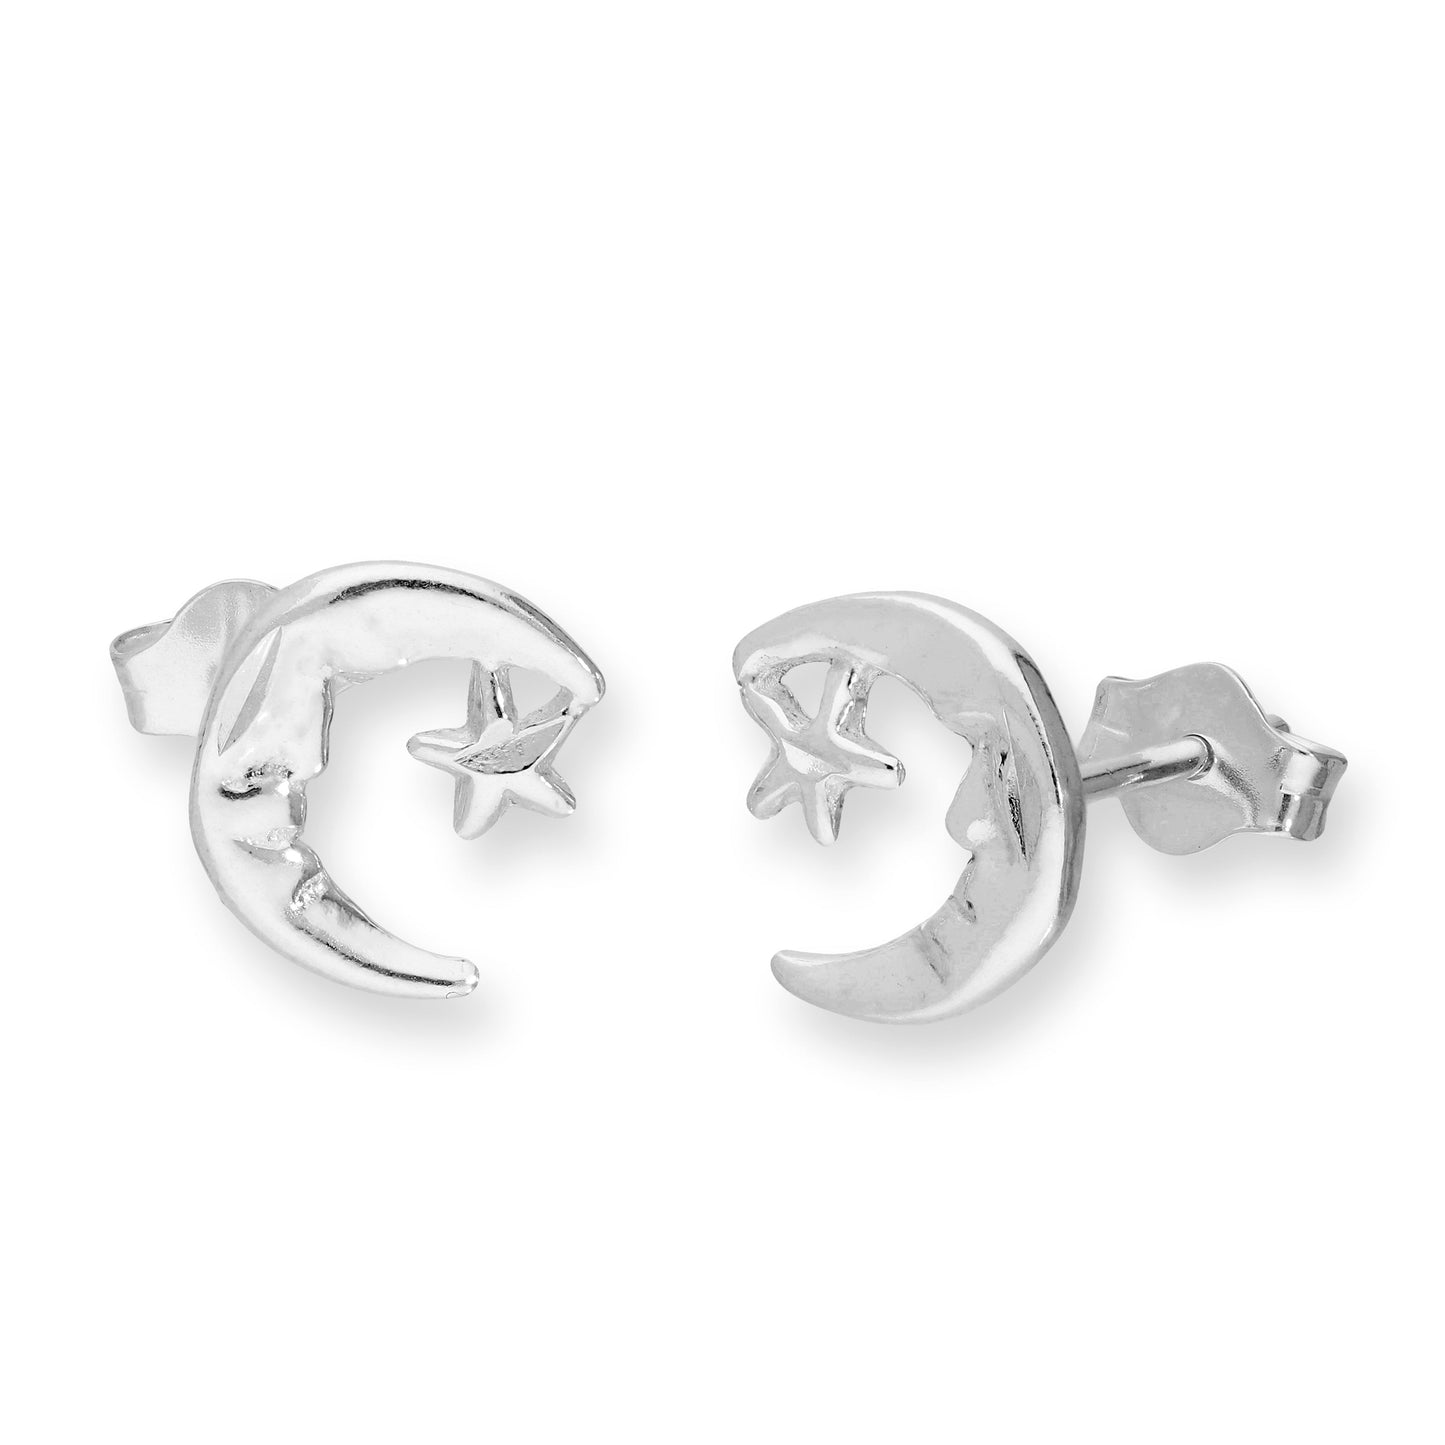 Sterling Silver Crescent Moon and Star Stud Earrings